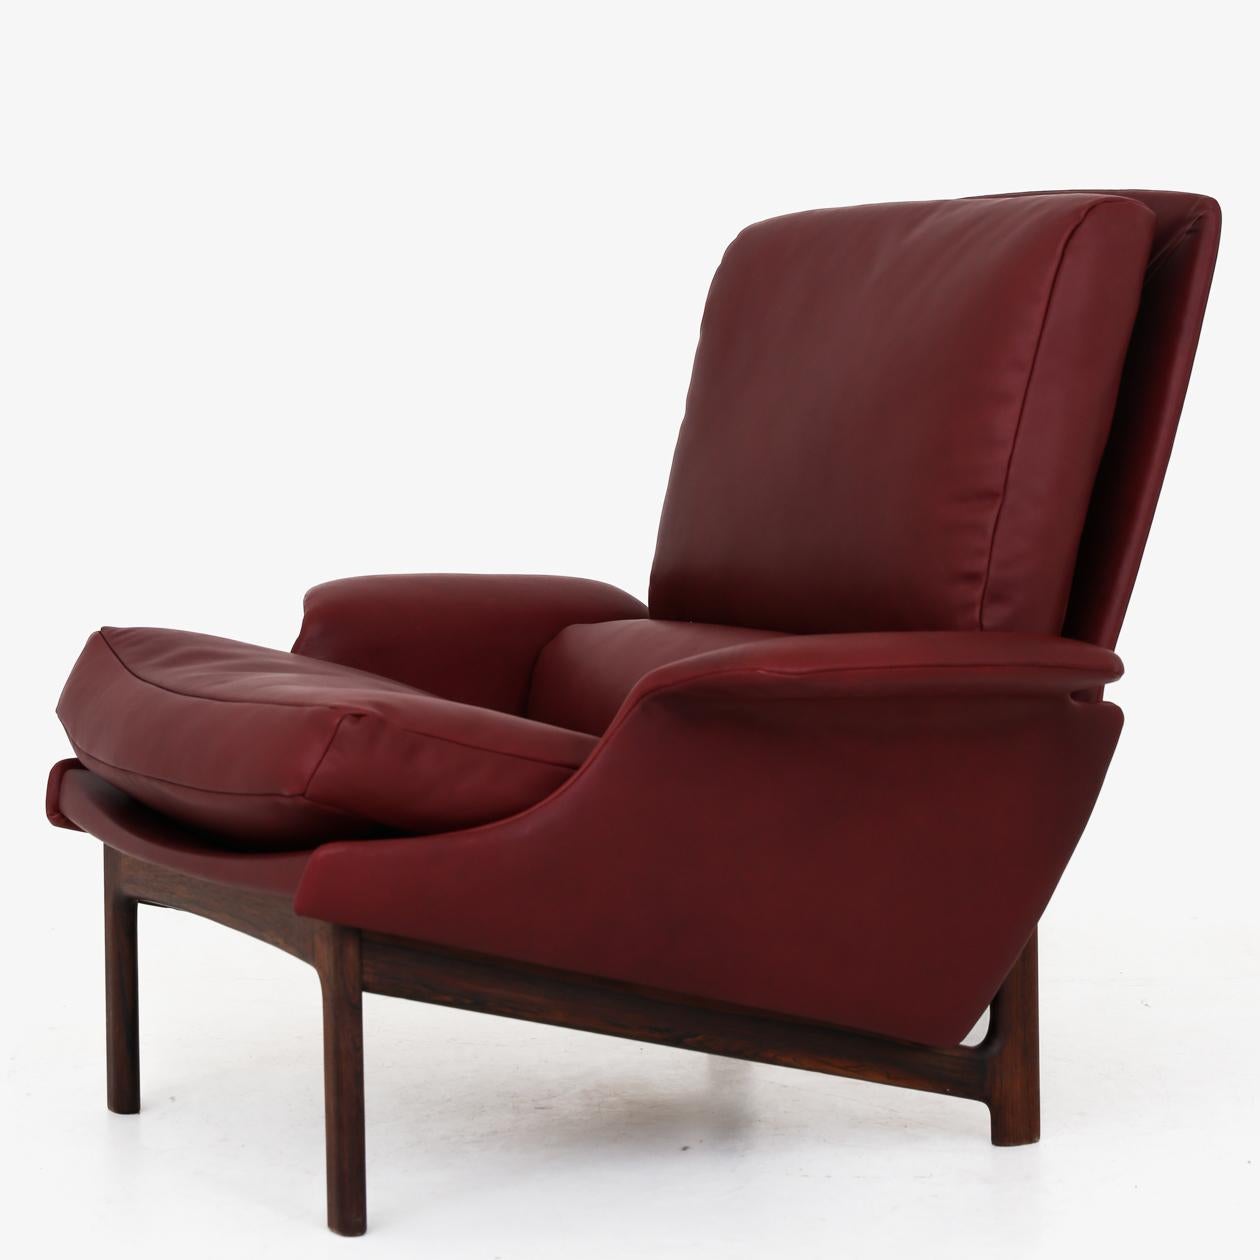 Reupholstered lounge chair and foot stool in 'Elegance' aniline leather (colour: Indian Red) on a rosewood frame. Designed in 1958. Ib Kofod Larsen / Mogens Kold.